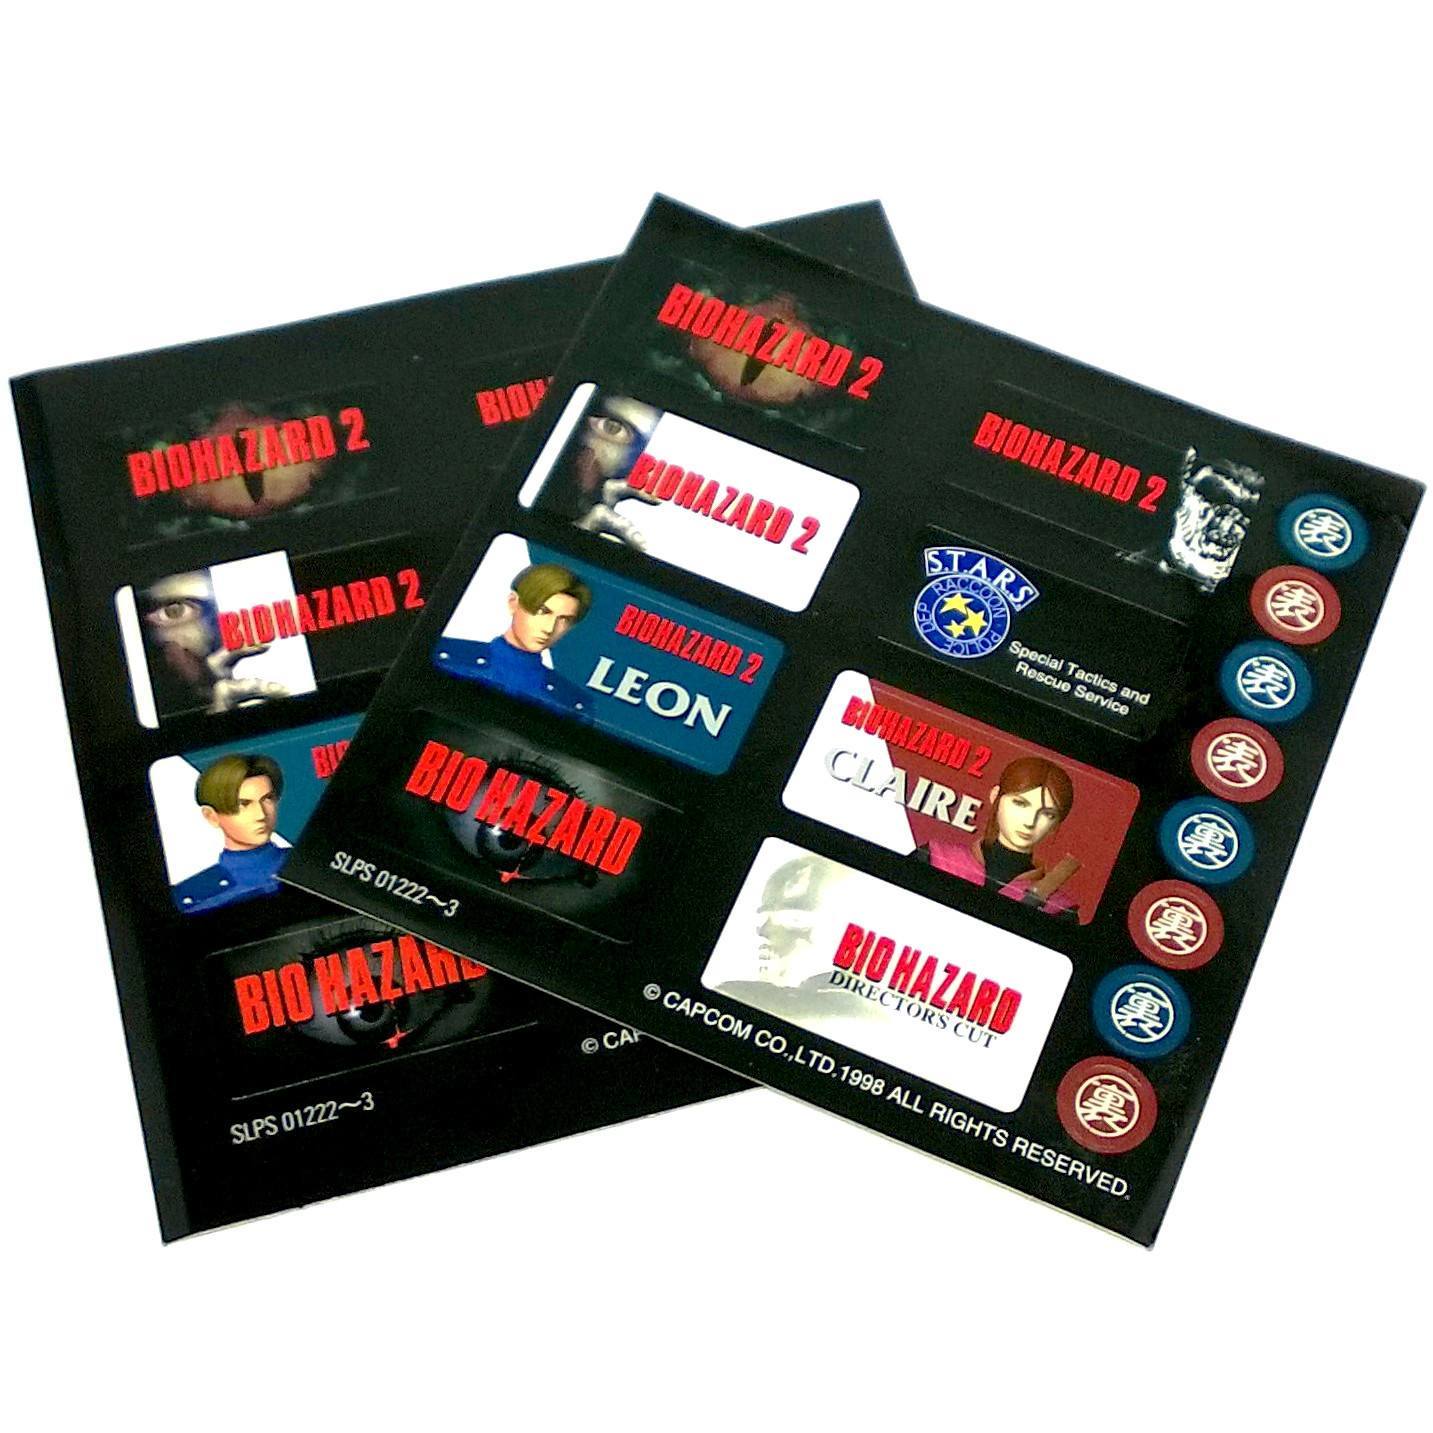 BioHazard 2 for PlayStation (import) - Stickers